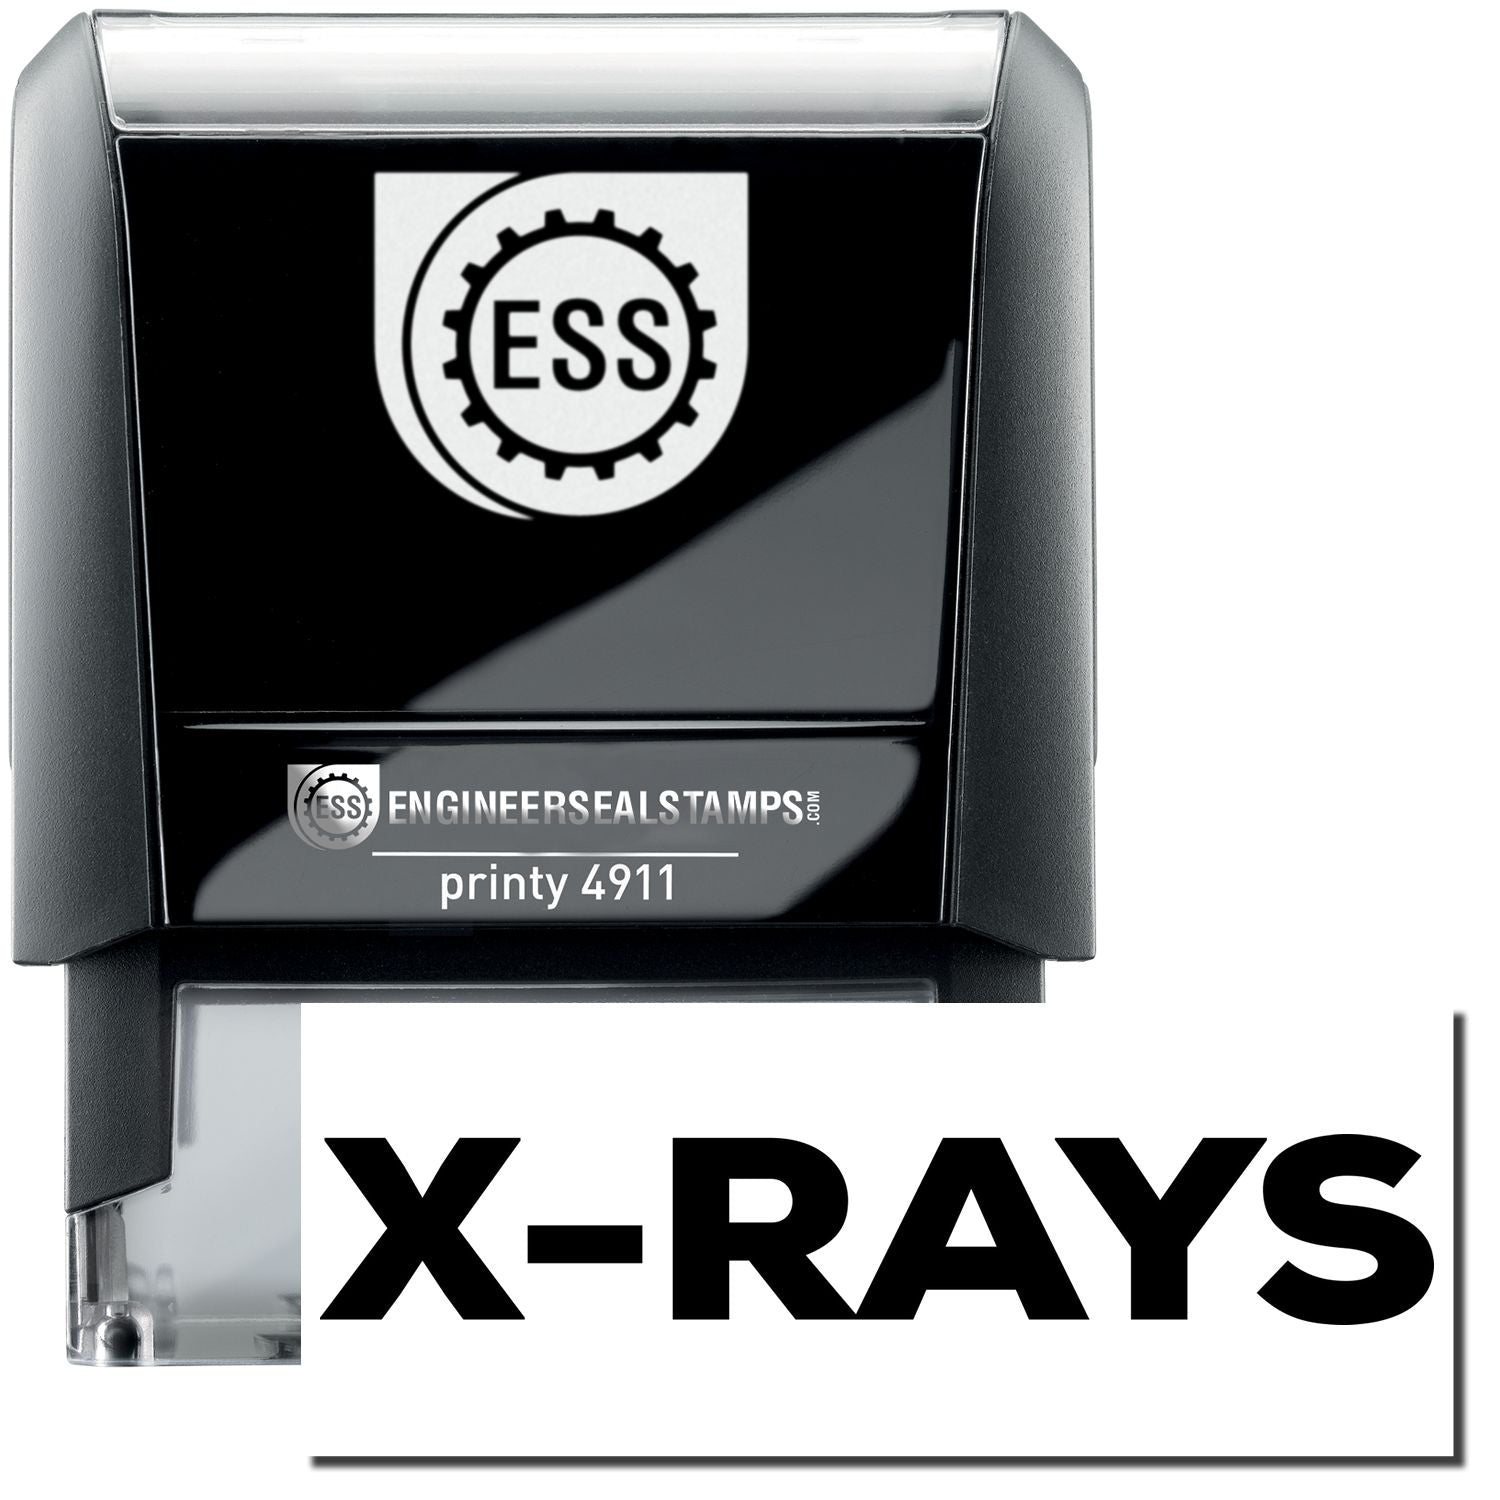 A self-inking stamp with a stamped image showing how the text "X-RAYS" in bold font is displayed after stamping.